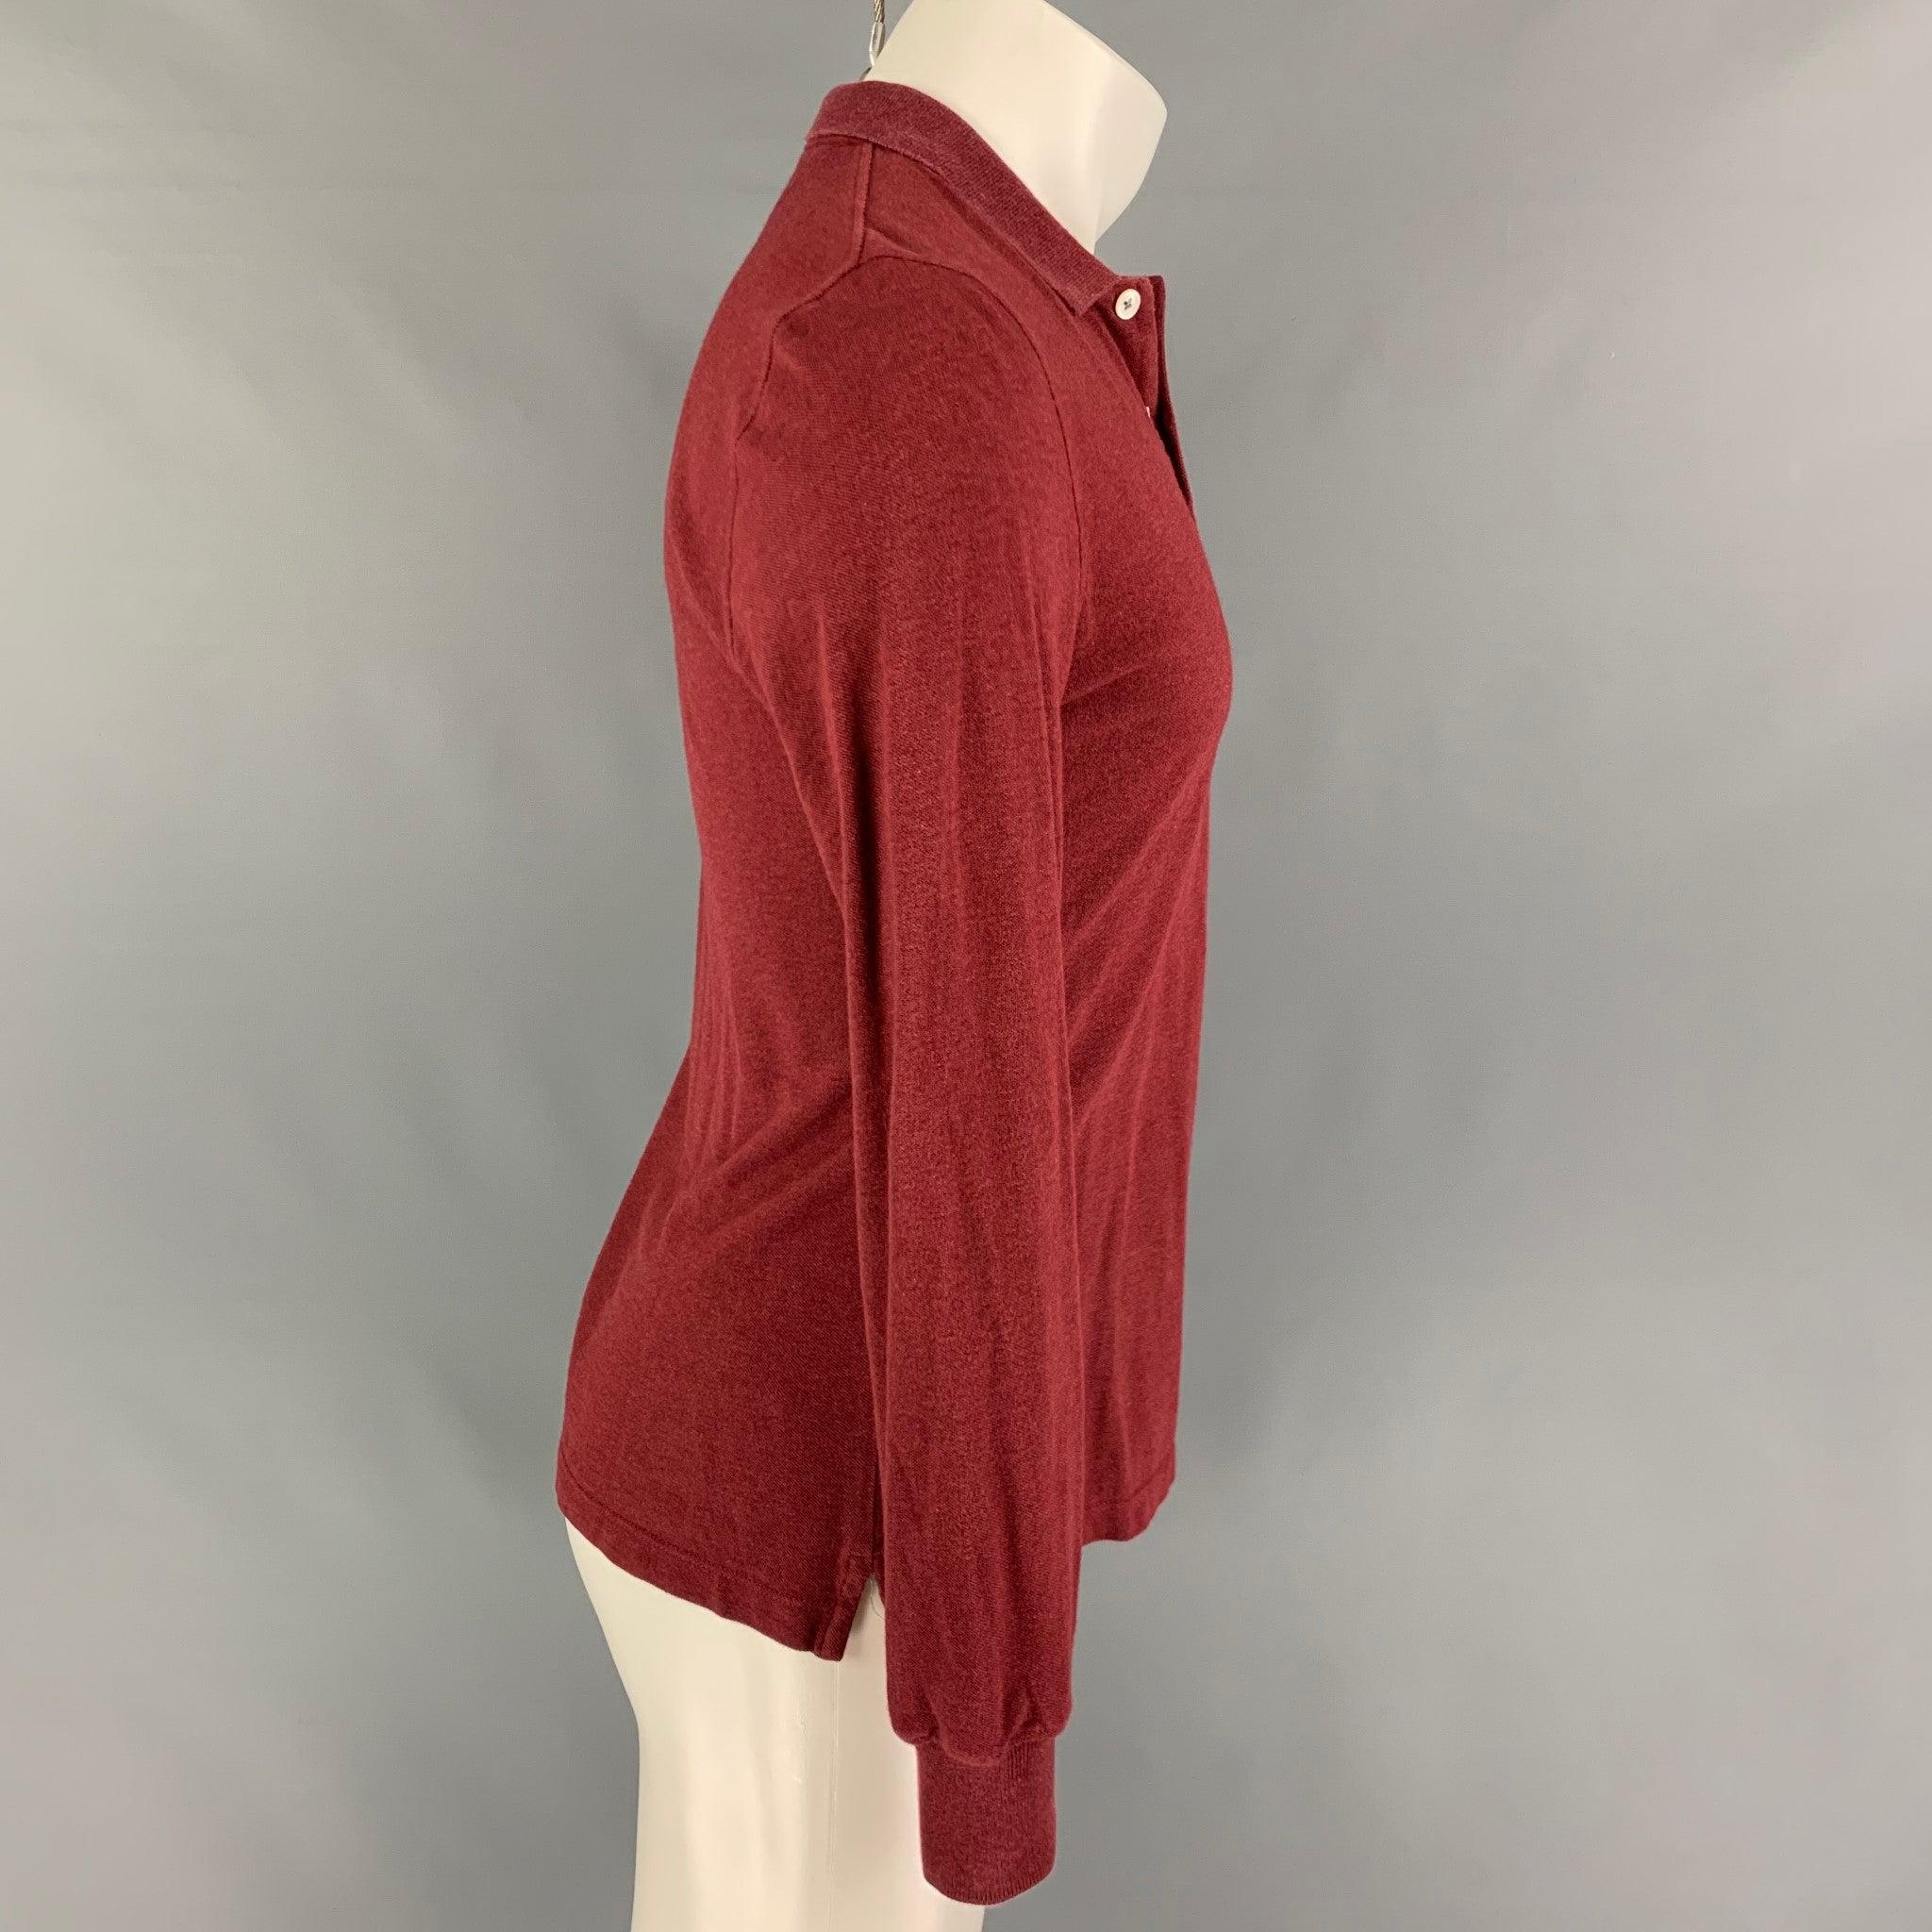 BRUNELLO CUCINELLI polo comes in a red cotton featuring a spread collar and a double button closure. Made in Italy.
Good
Pre-Owned Condition. Light wear. As-is.  

Marked:   S 

Measurements: 
 
Shoulder: 16 inches  Chest: 38 inches  Sleeve: 27